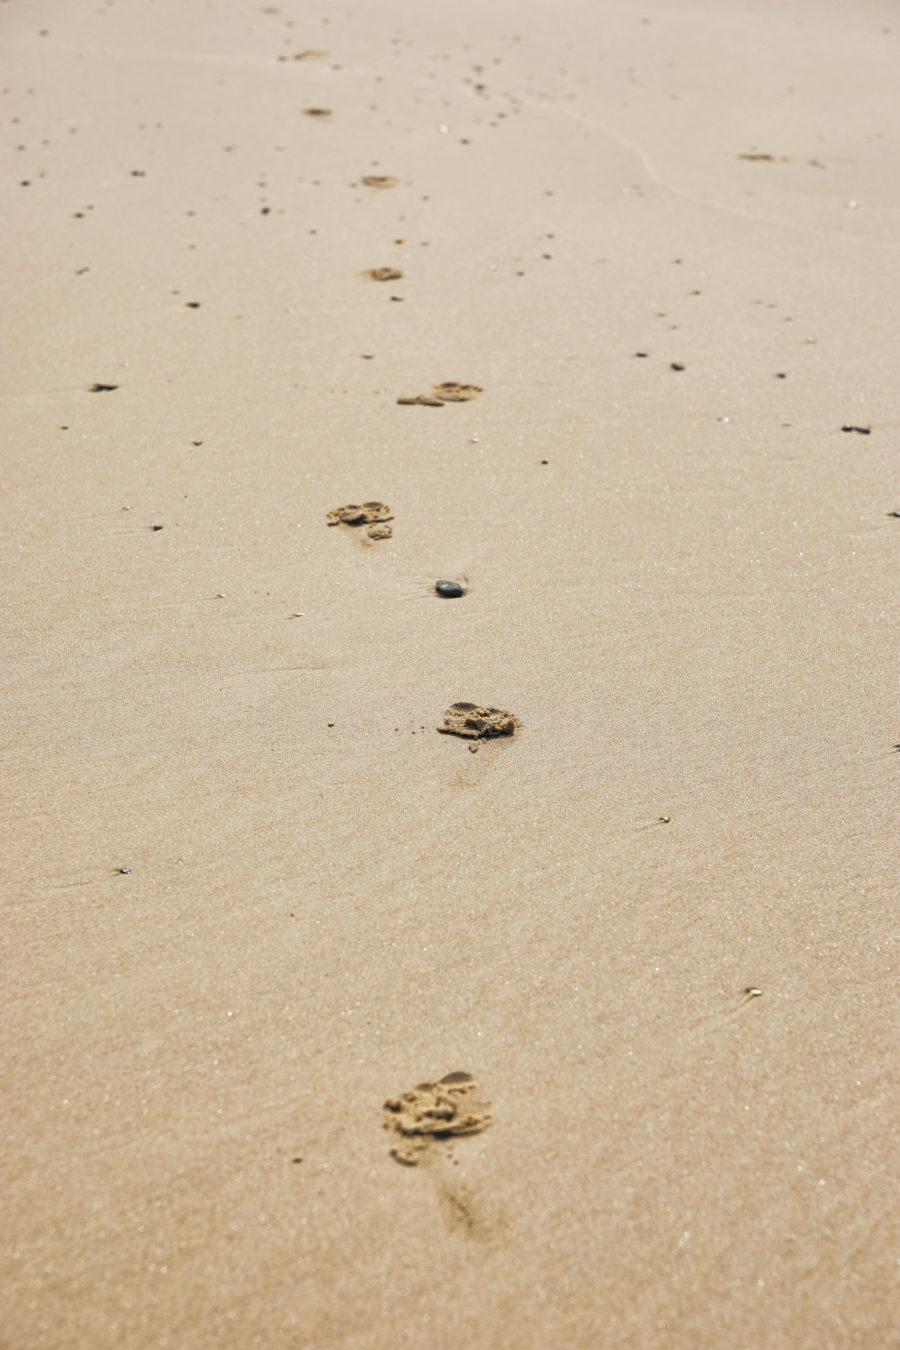 Two more free images of footprints in the sand